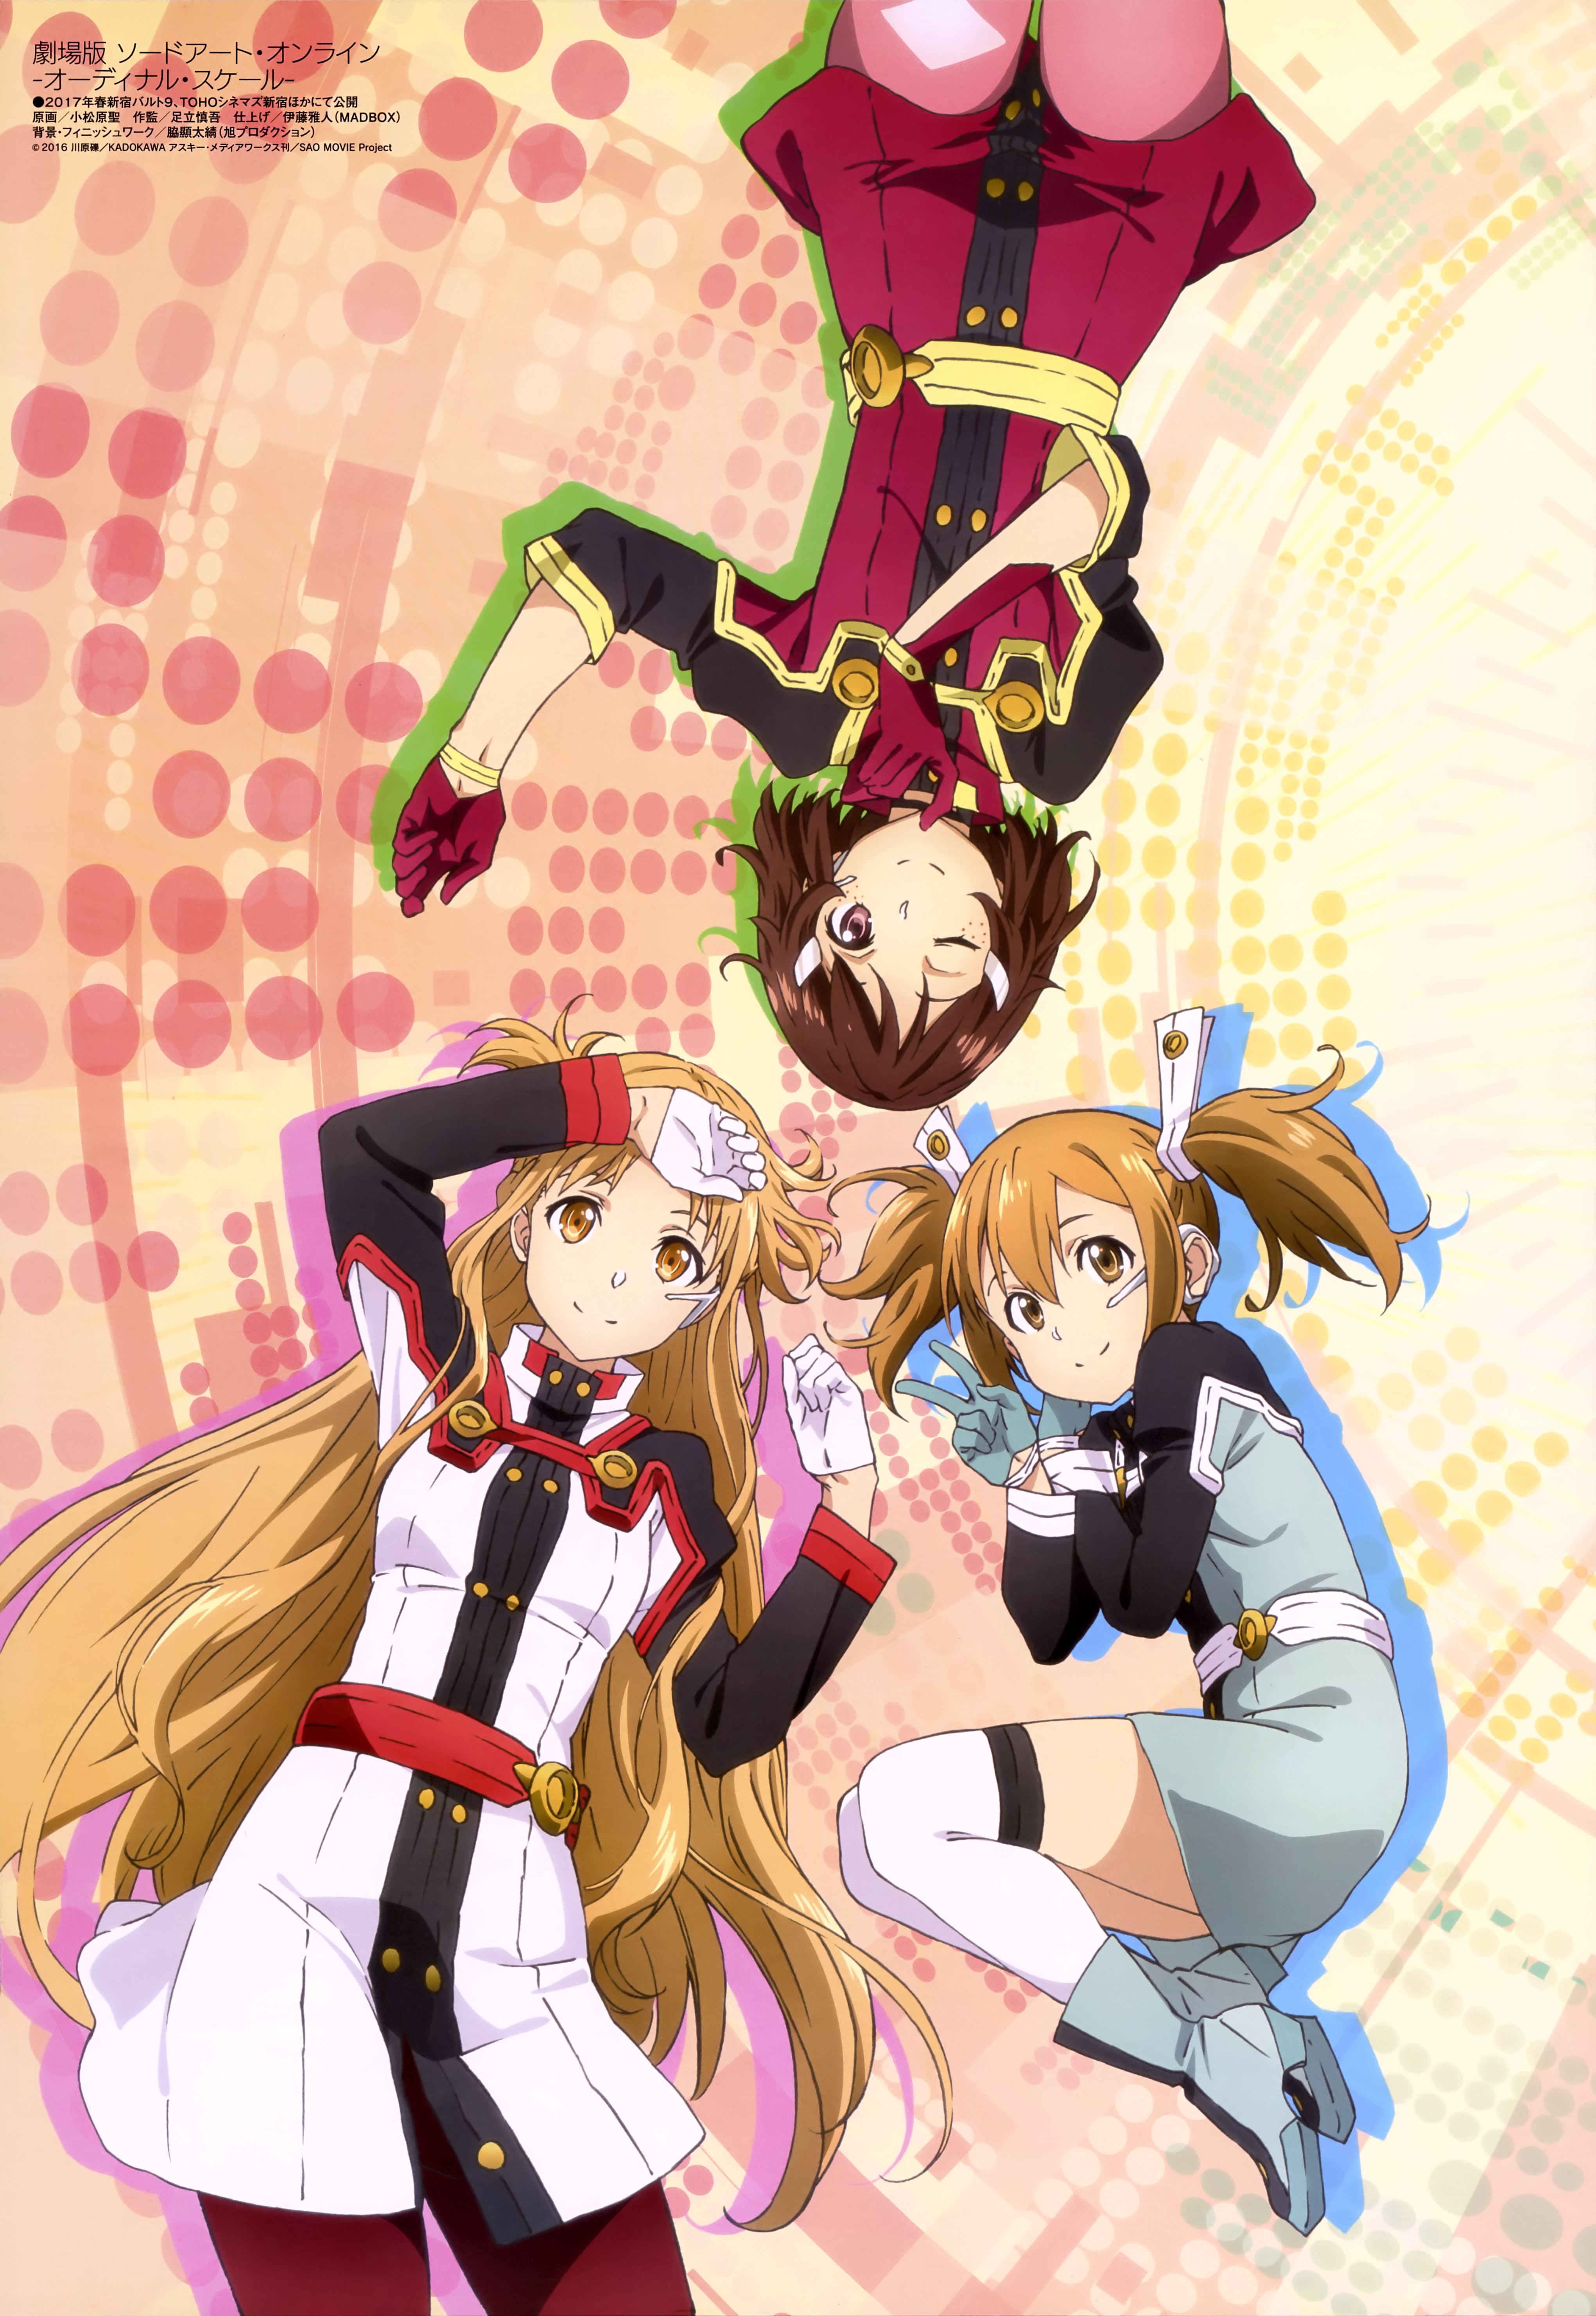 Sword Art Online Film Takes Place After Mother's Rosario Arc - News - Anime  News Network